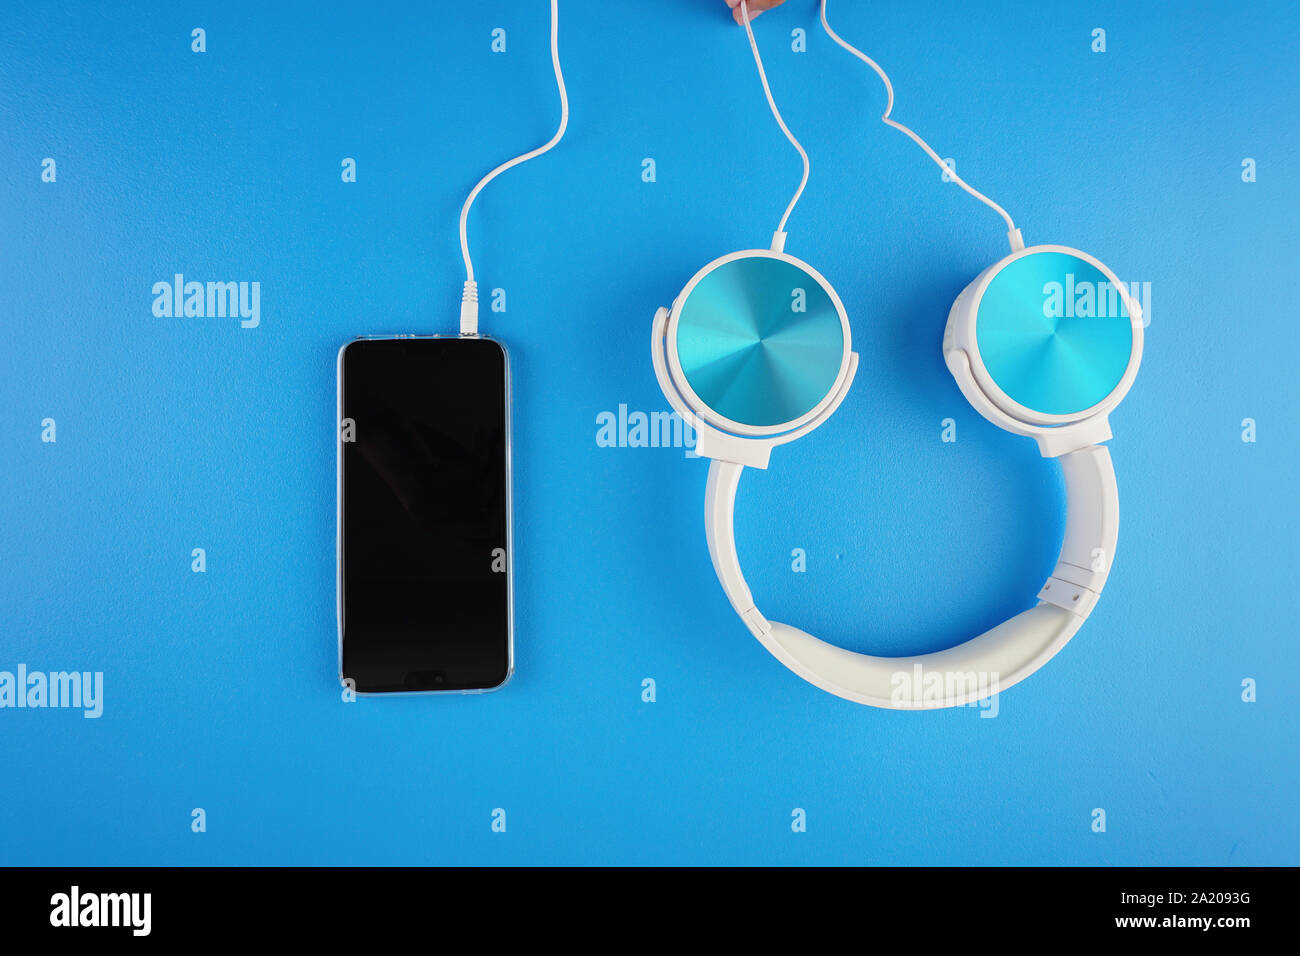 blue white color headphone placed next to handphone on a blue background Stock Photo